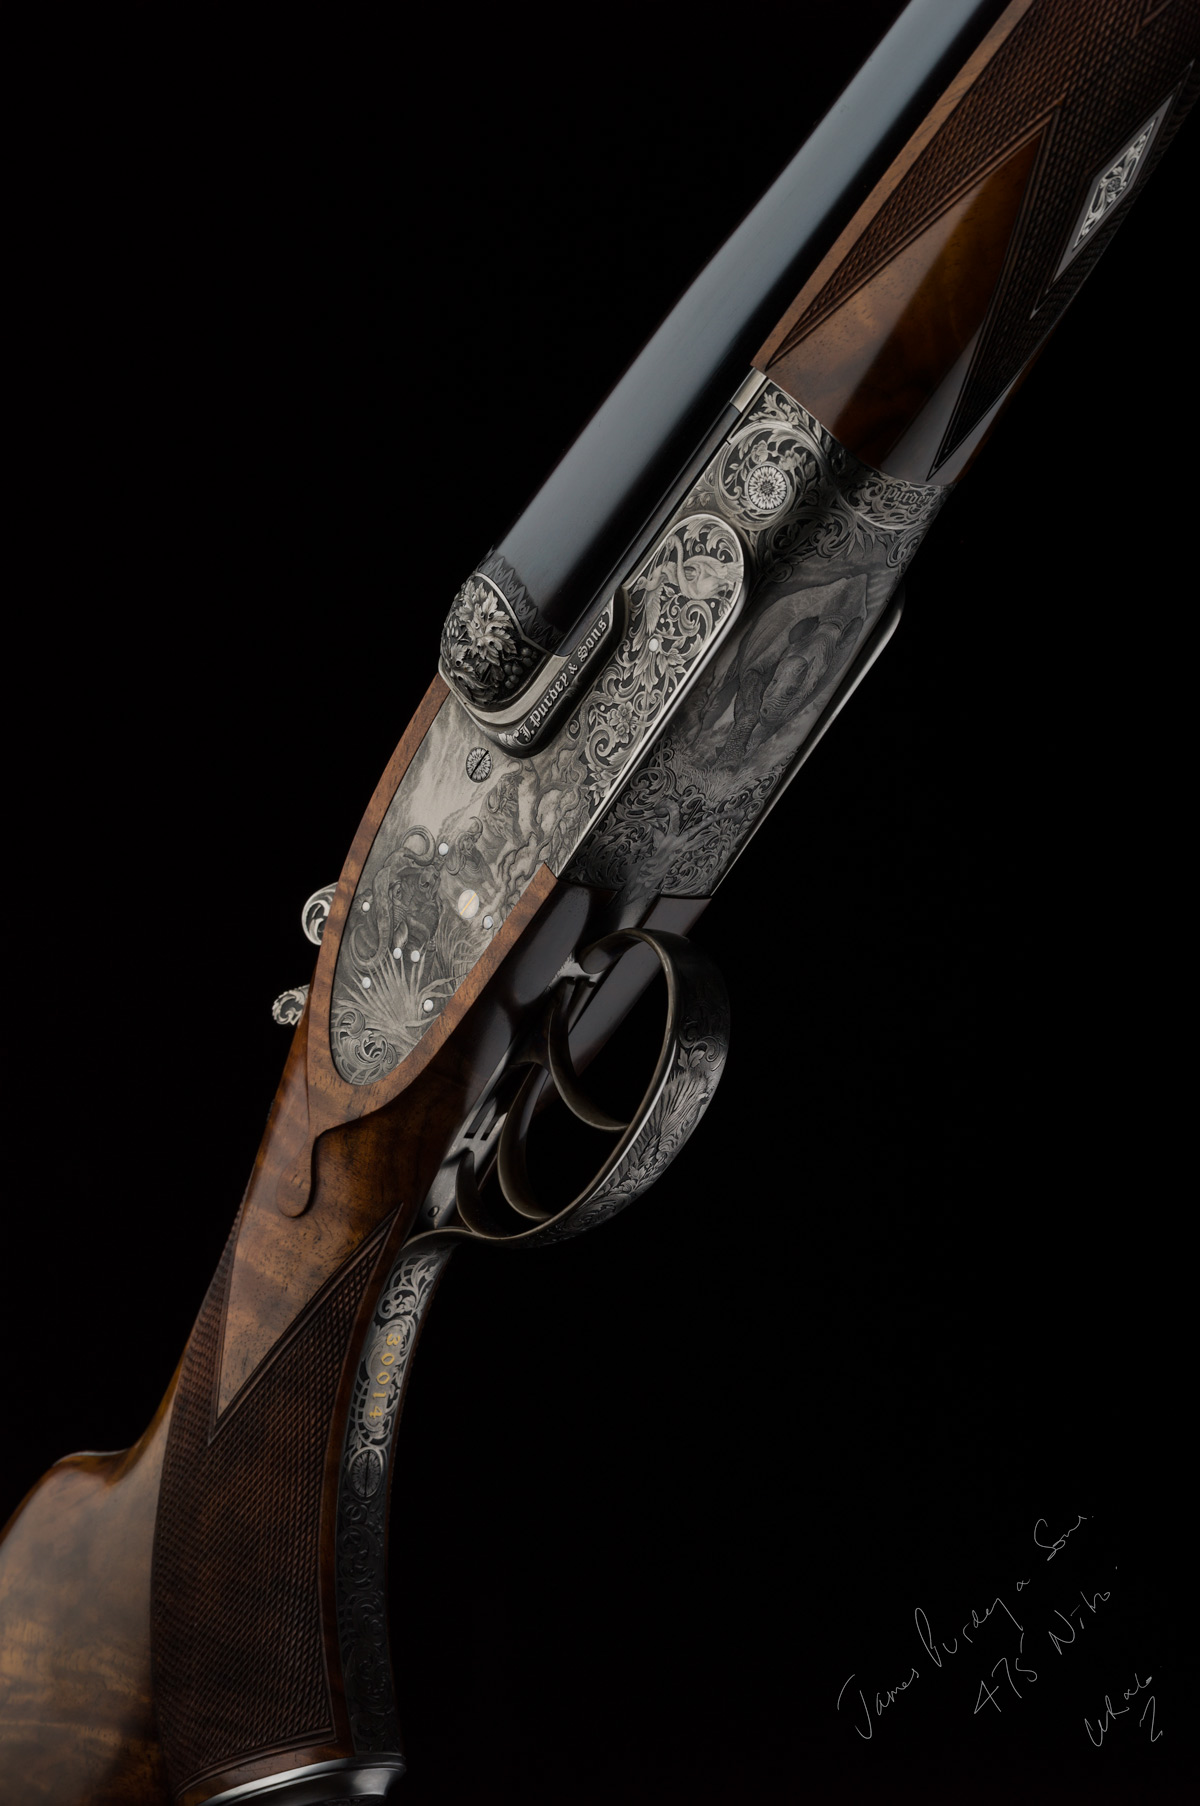 The shape of the Beesley side-lock provides a graceful area for engraving, here seen on a Purdey 475 Nitro Express double rifle. (Picture courtesy of theexplora.com).